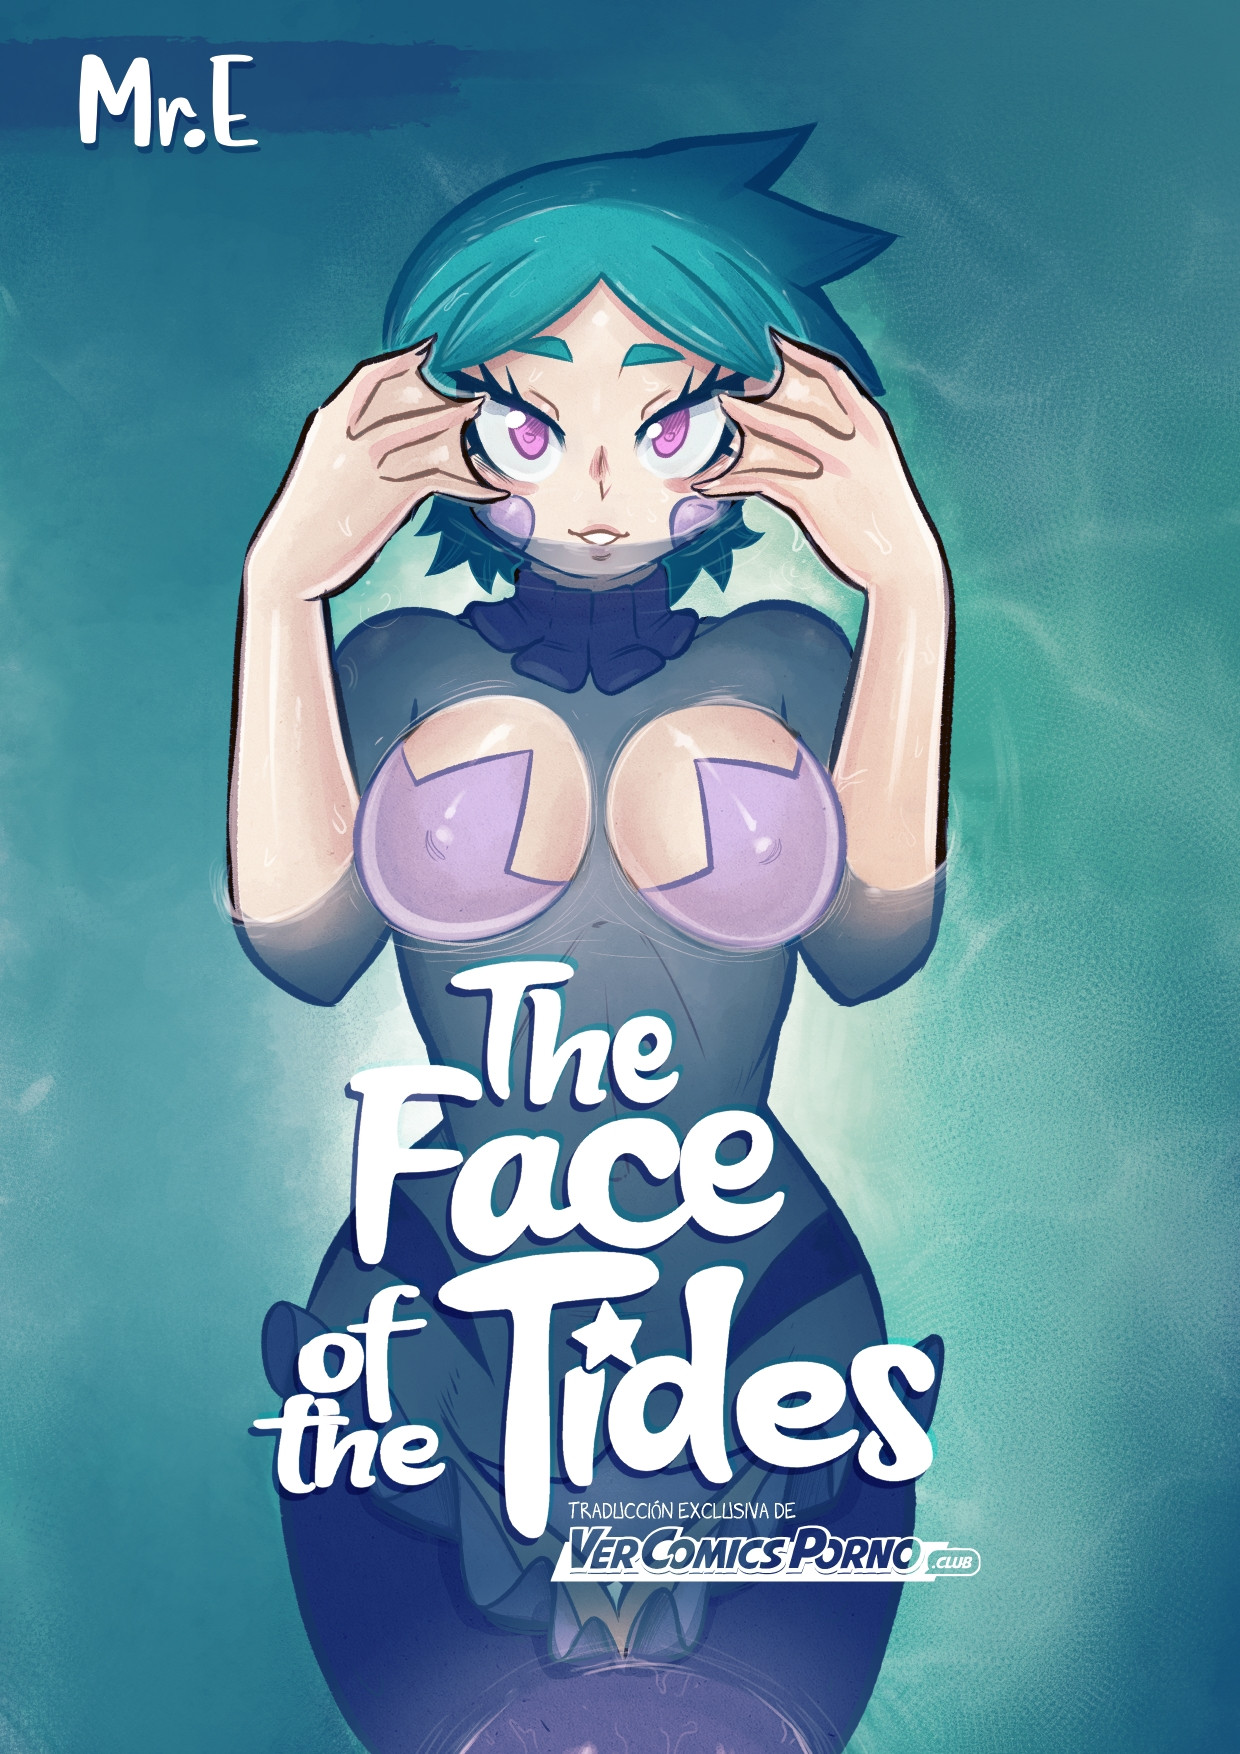 The Face of the Tides Mr'E